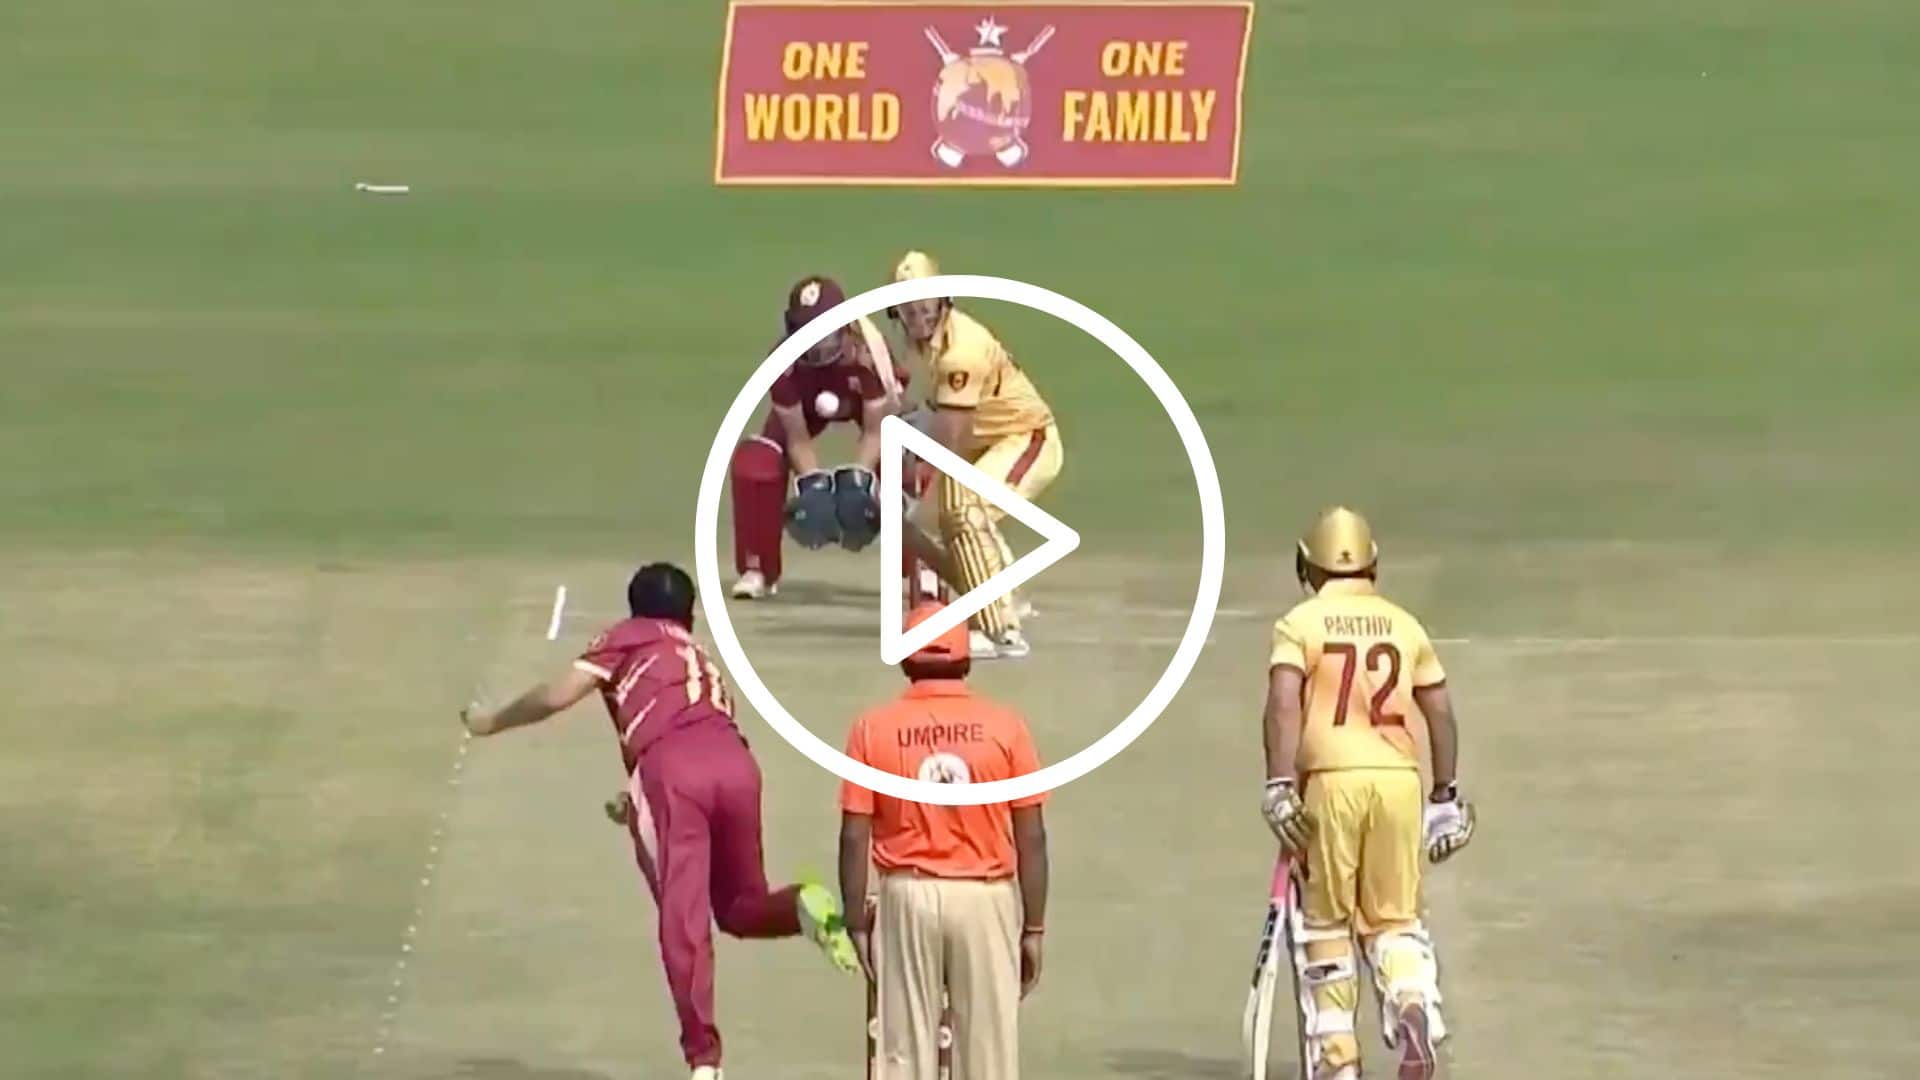 [Watch] Sachin Tendulkar Turns Things Around By Bowling In One World One Family Cup